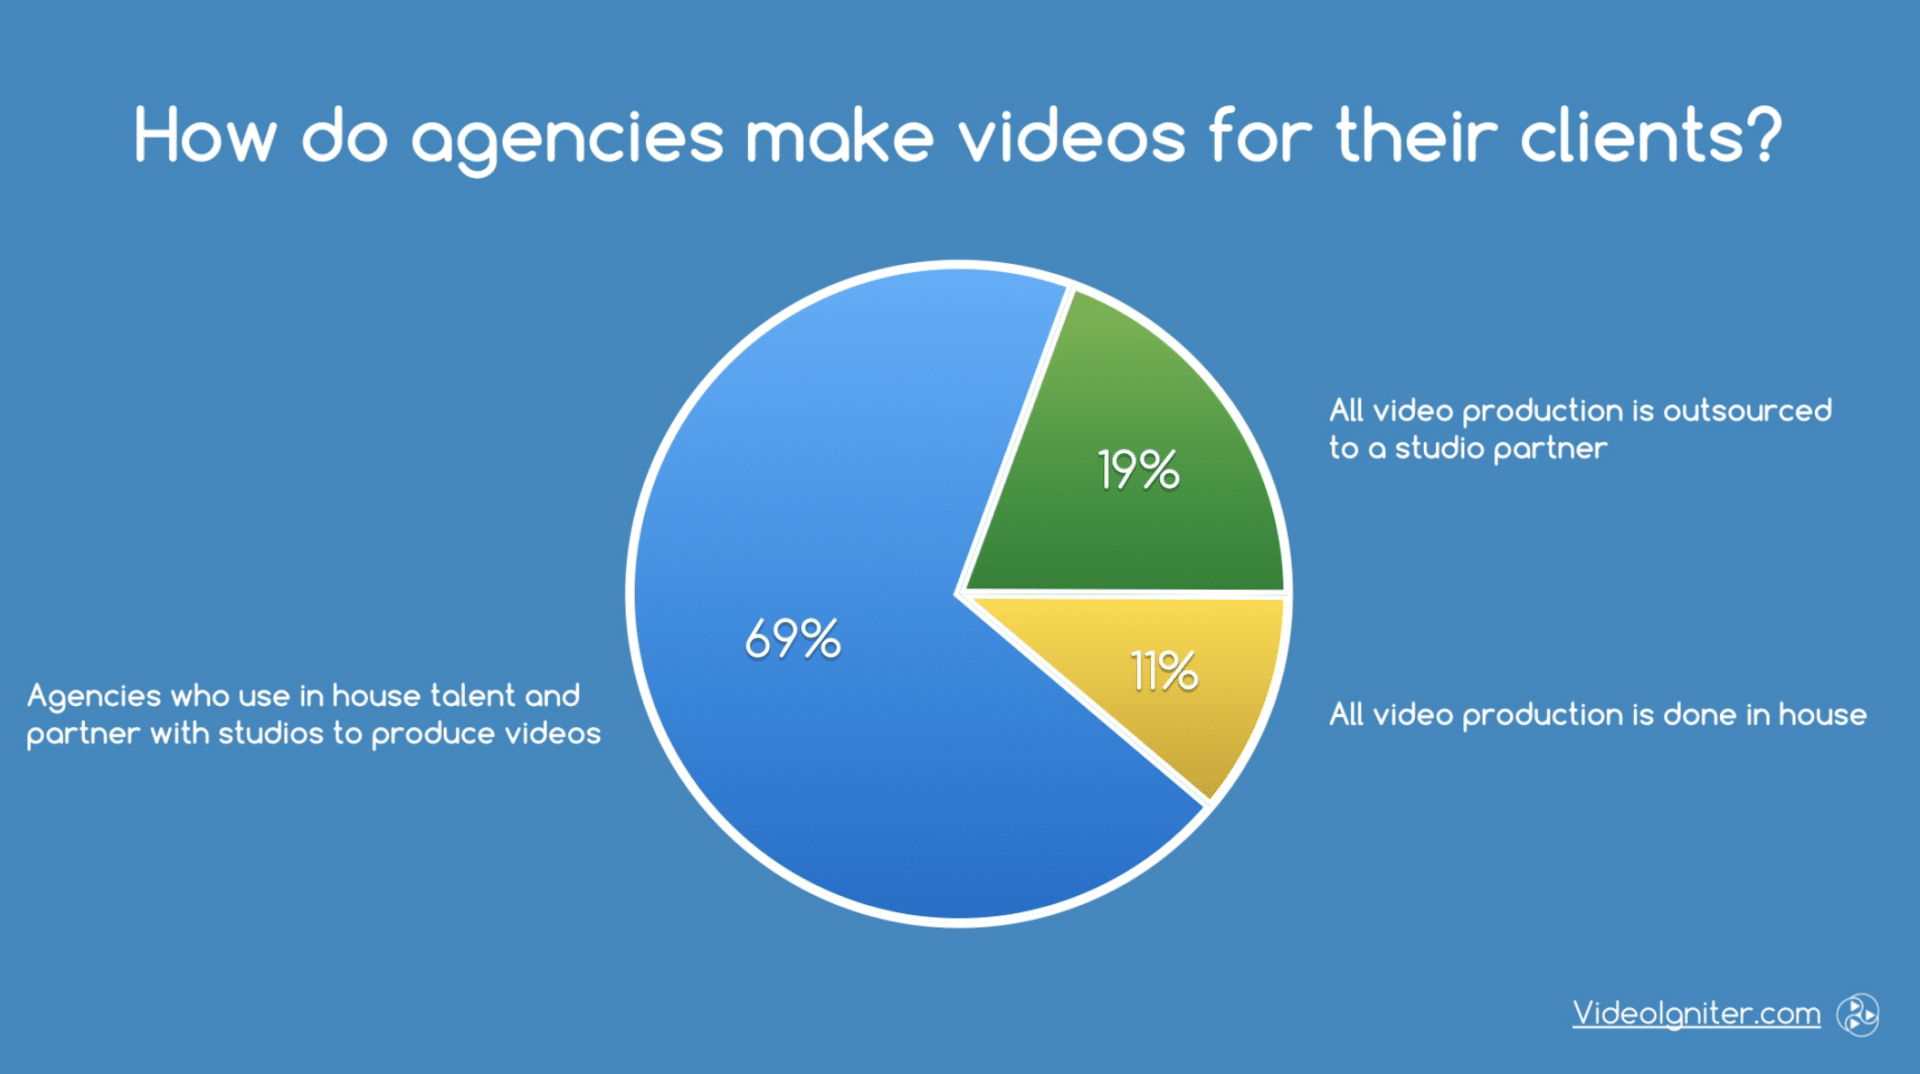 How do agencies make videos for their clients?